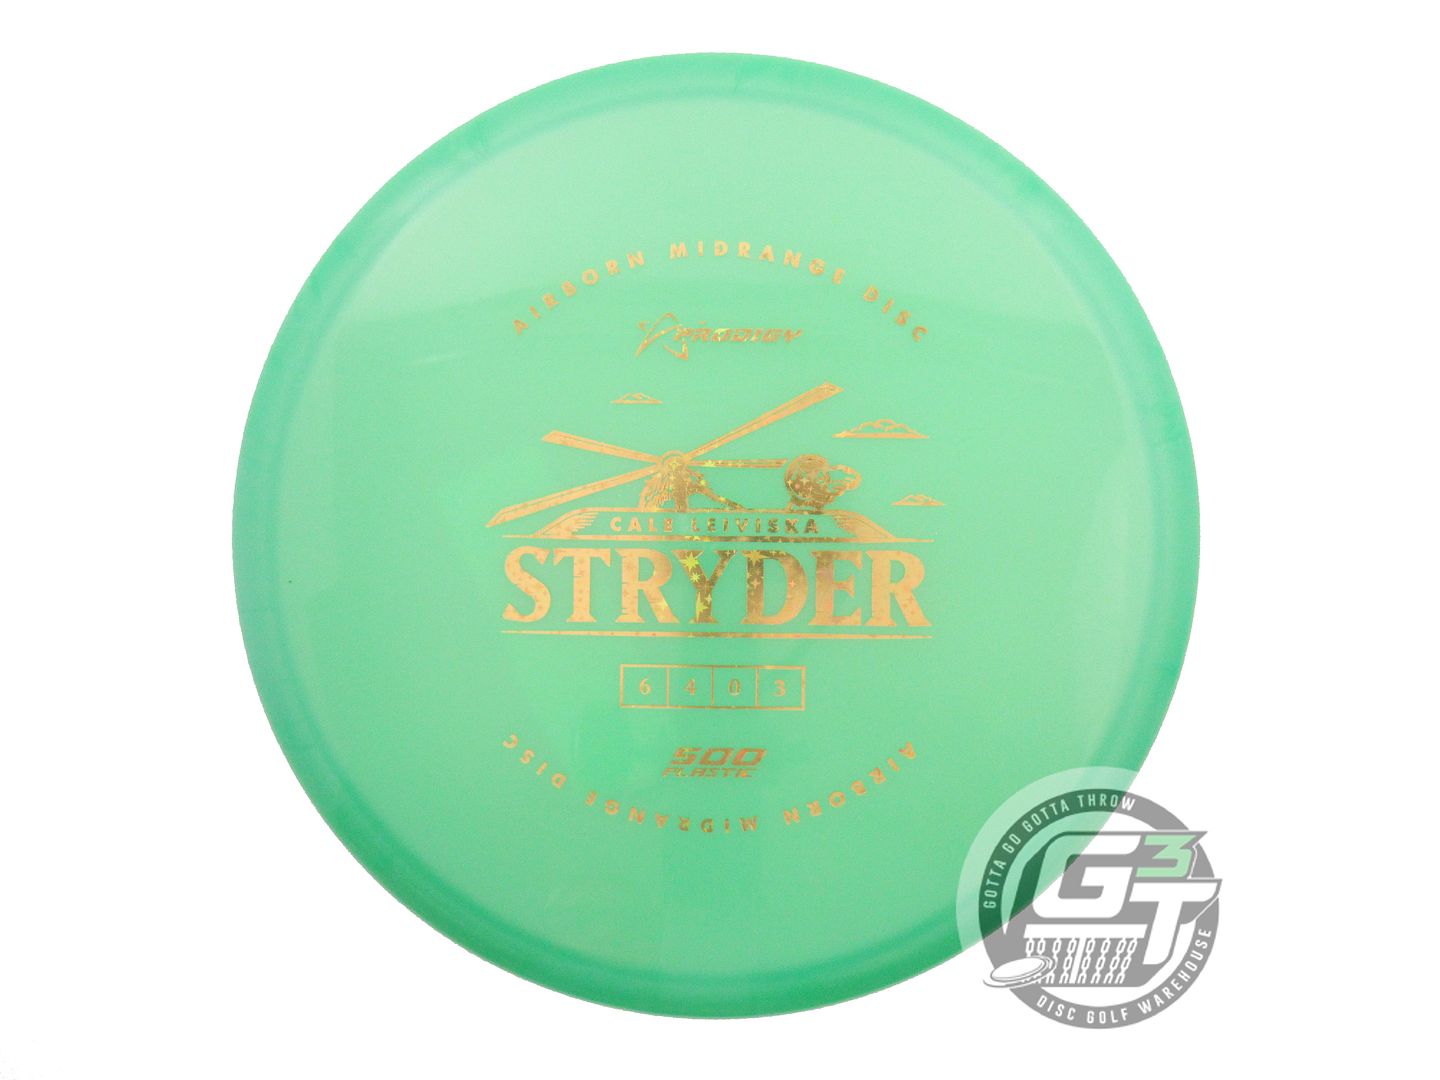 Prodigy Collab Series Cale Leiviska 500 Series Stryder Midrange Golf Disc (Individually Listed)